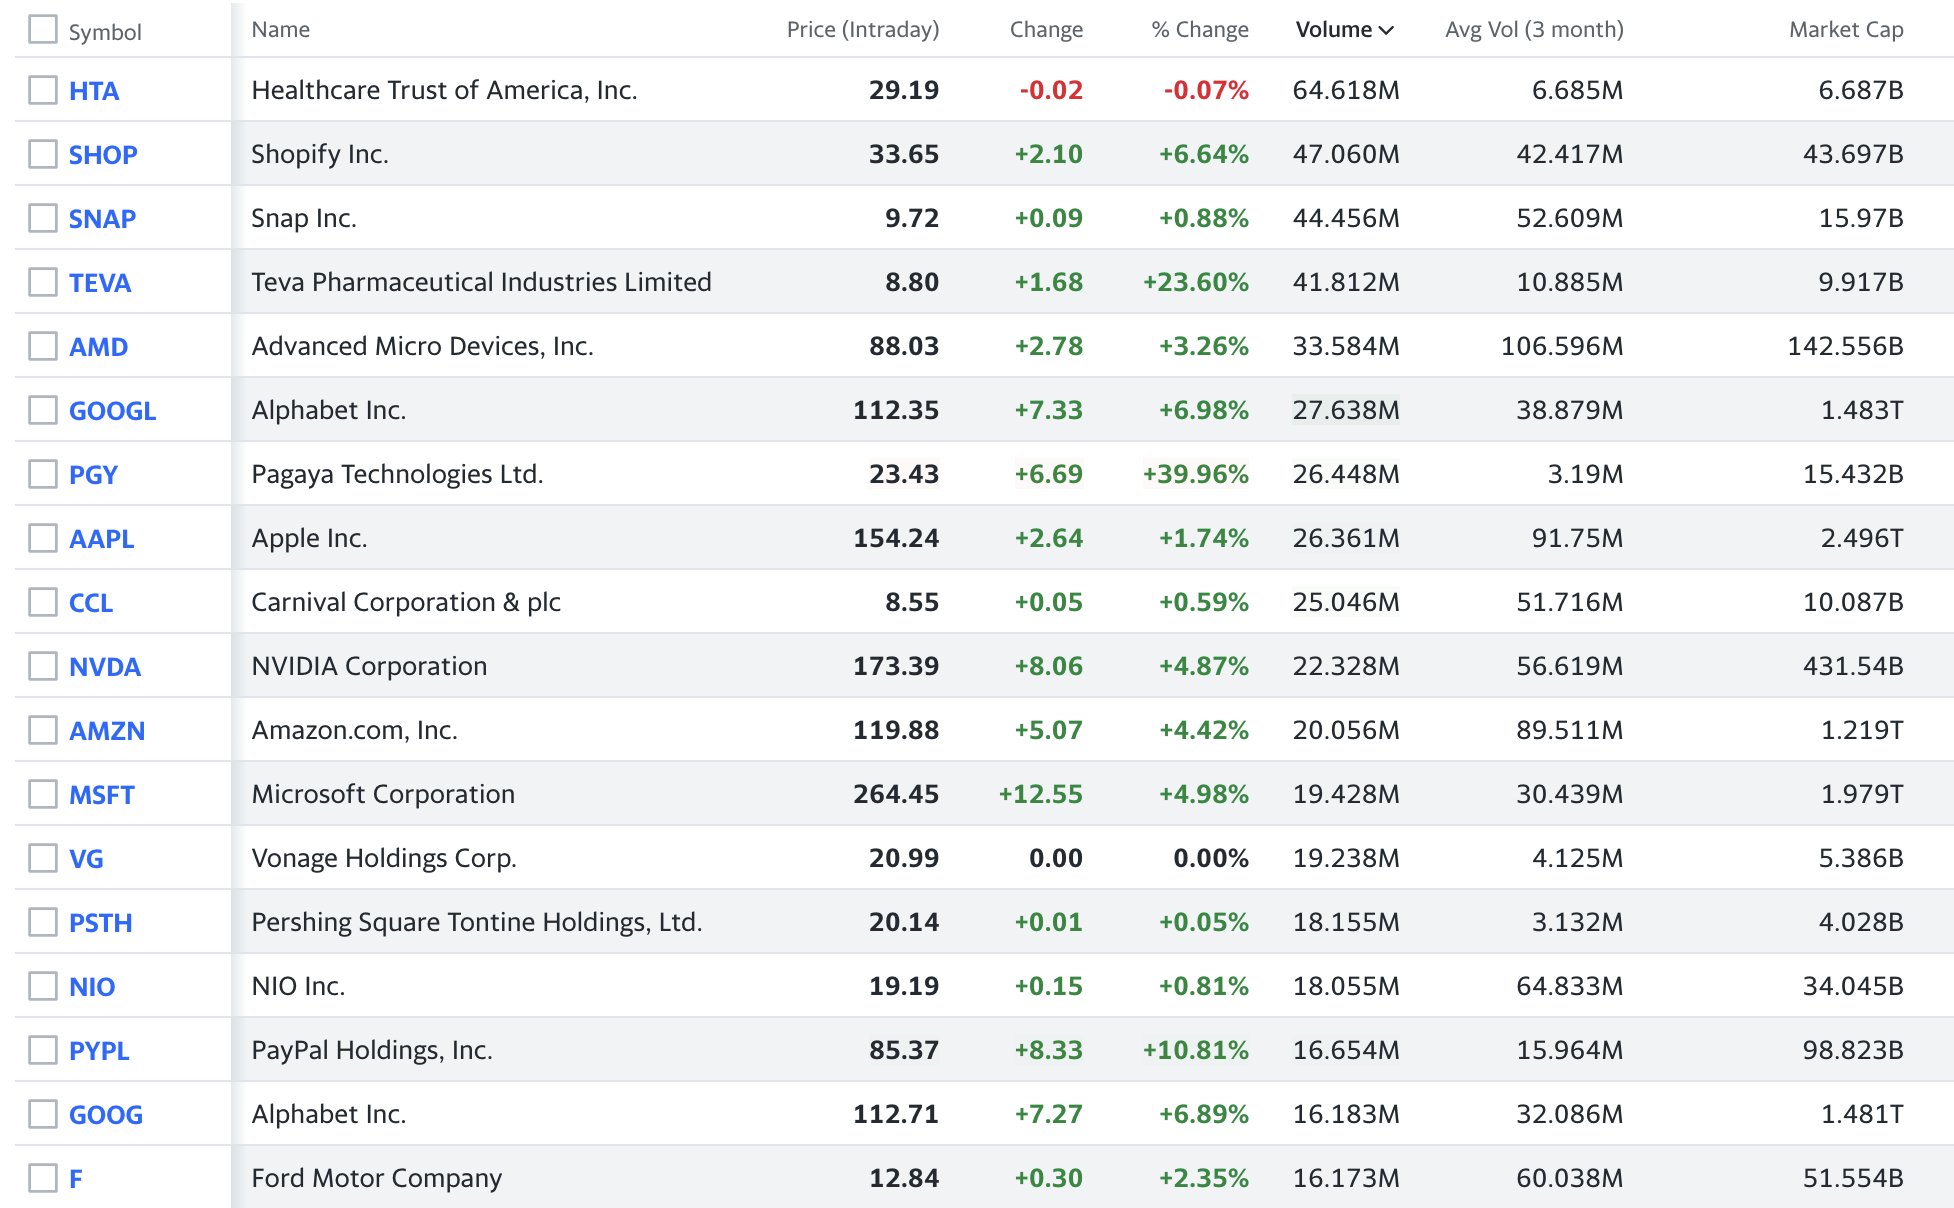 Nominering Baron pause Yahoo Finance on Twitter: "Most actives today include $HTA $SHOP $SNAP $TEVA  $AMD $GOOGL $PGY $AAPL $CCL $NVDA $AMZN $MSFT $VG $PSTH $NIO $PYPL $GOOG $F  https://t.co/iap1kz1uTX https://t.co/E8C3kOsm5e" / Twitter